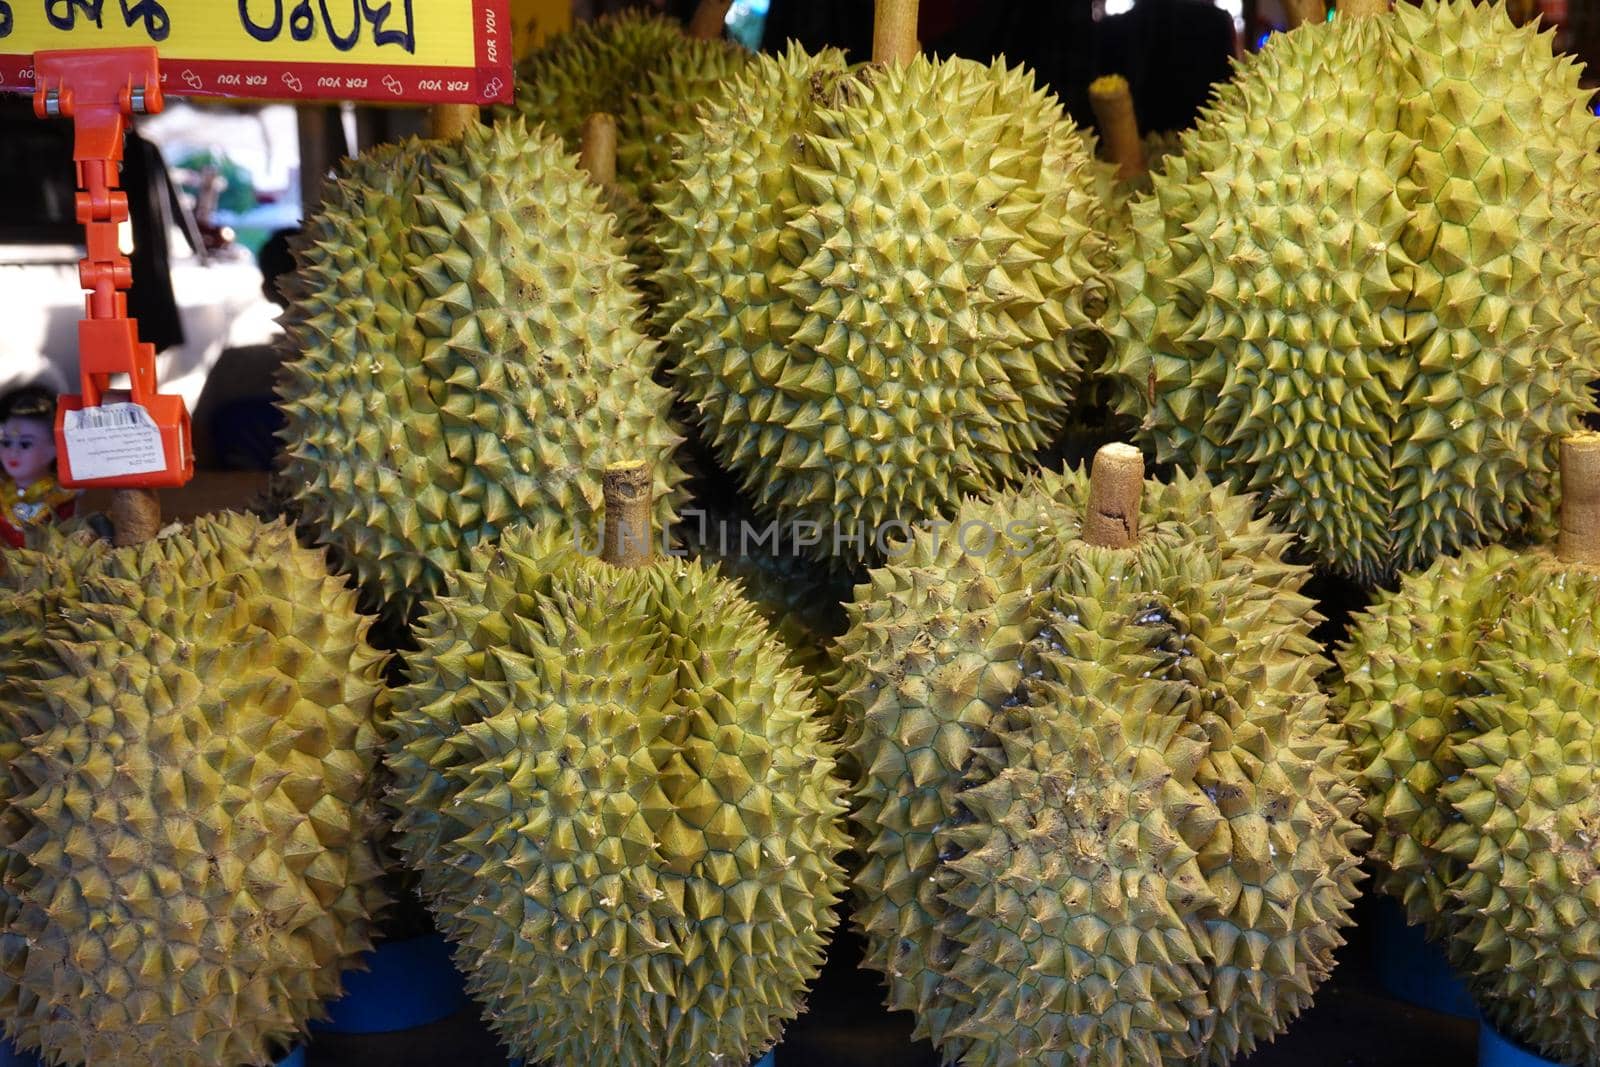 Basket full of durians at Talad Thai fruits market. by chuanchai